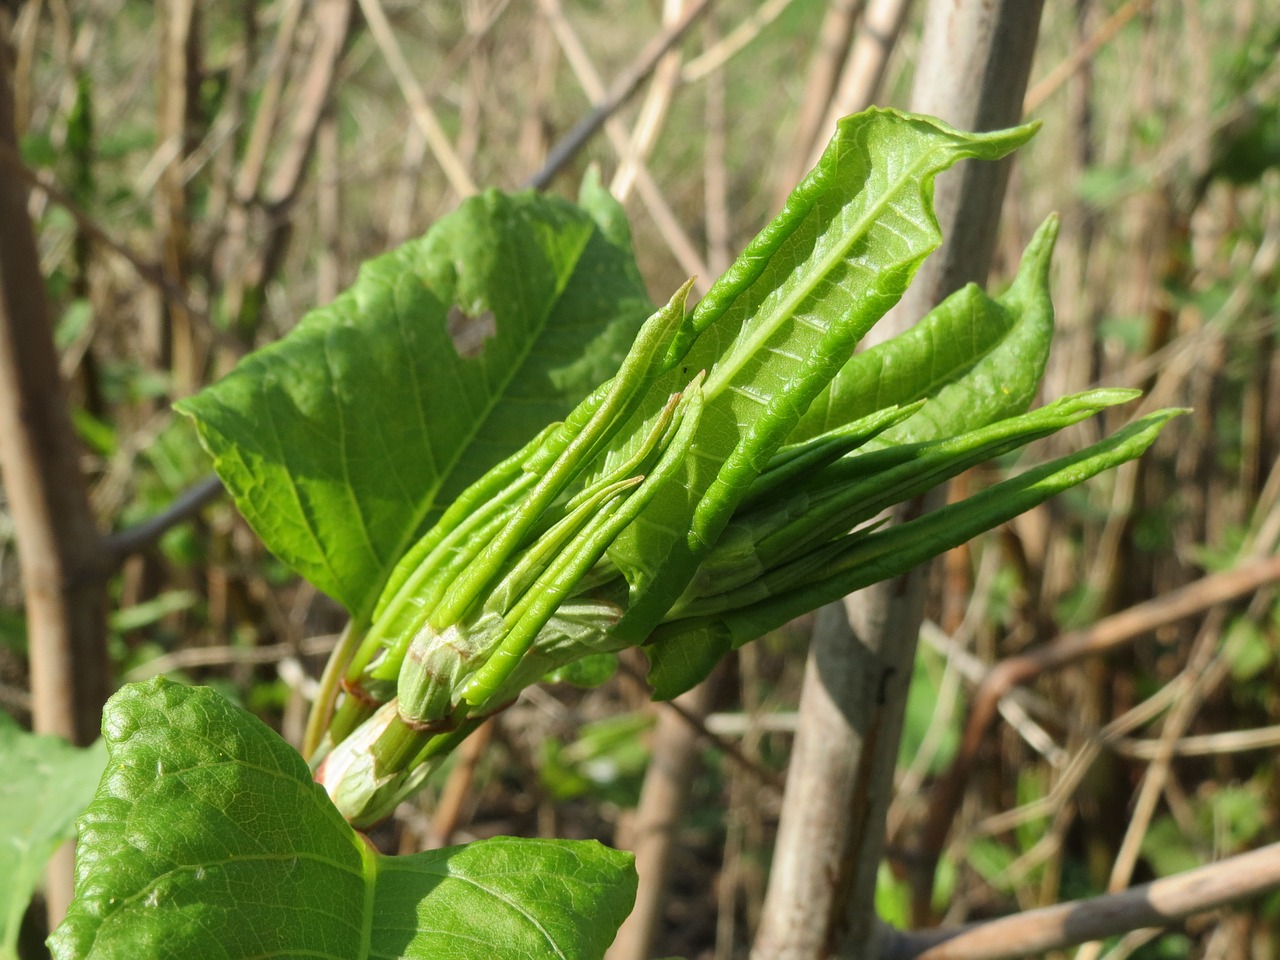 Young Japanese knotweed leaves